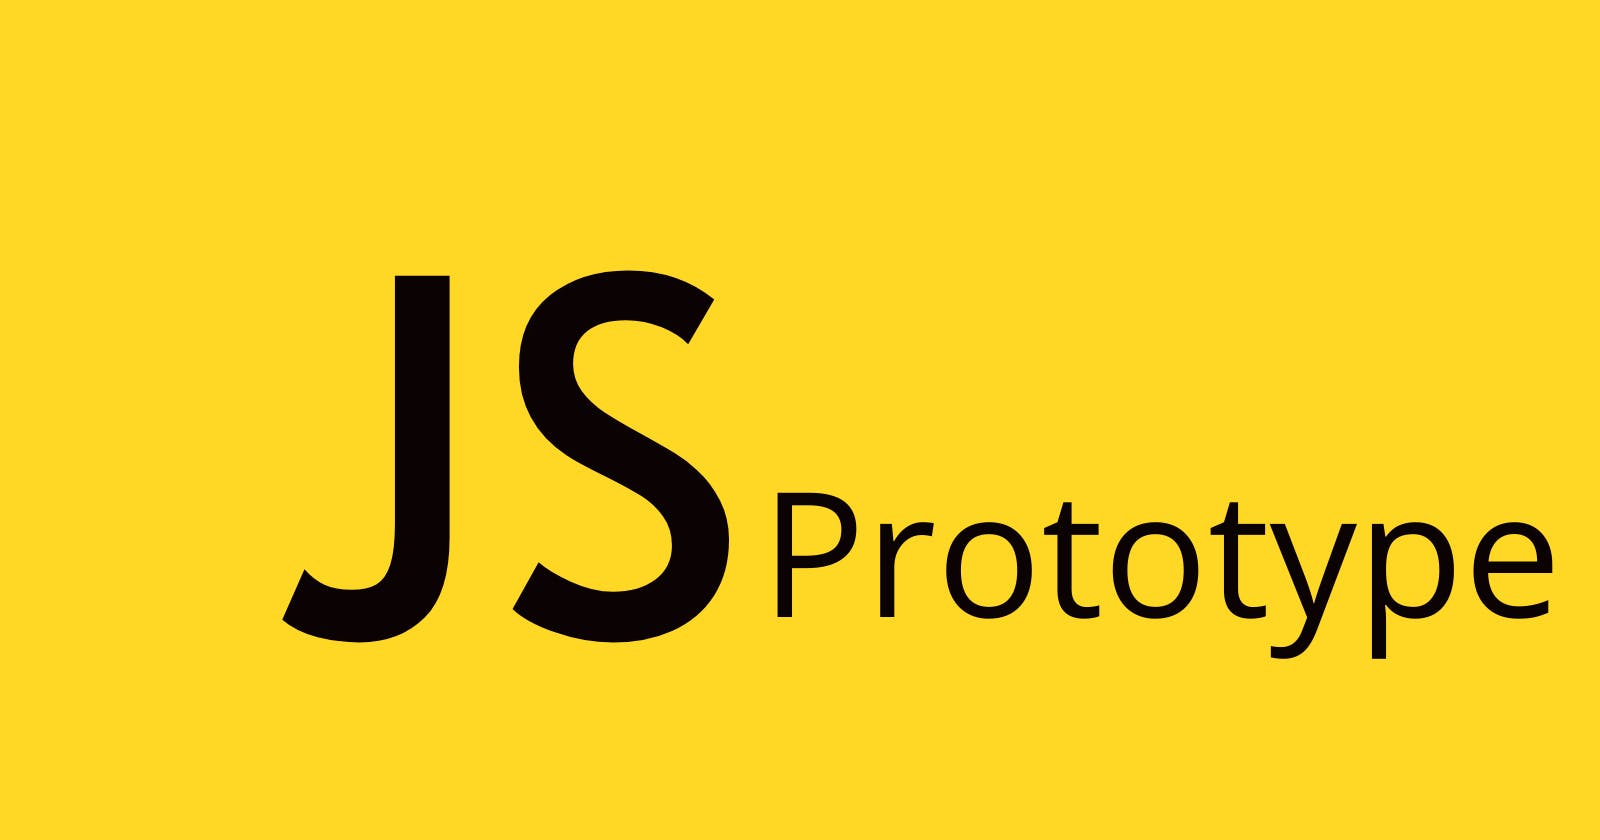 Javascript Prototype: An Object-Oriented Programming Introduction